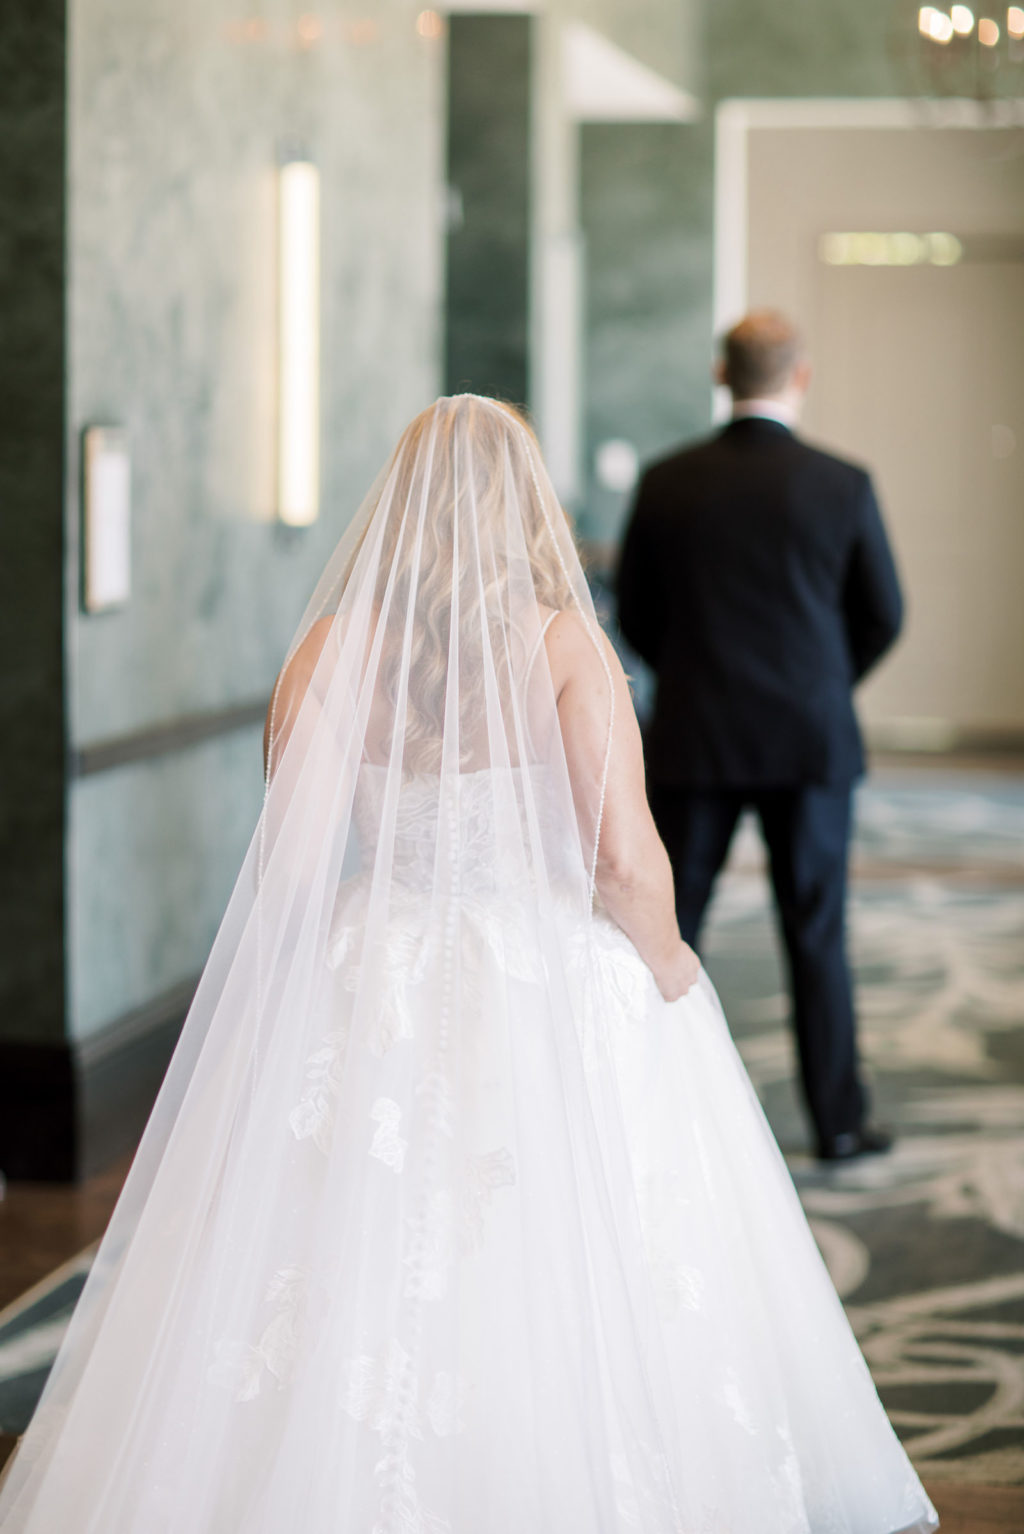 Tampa Bride in Full Length Tulle Veil First Look Photo with Groom